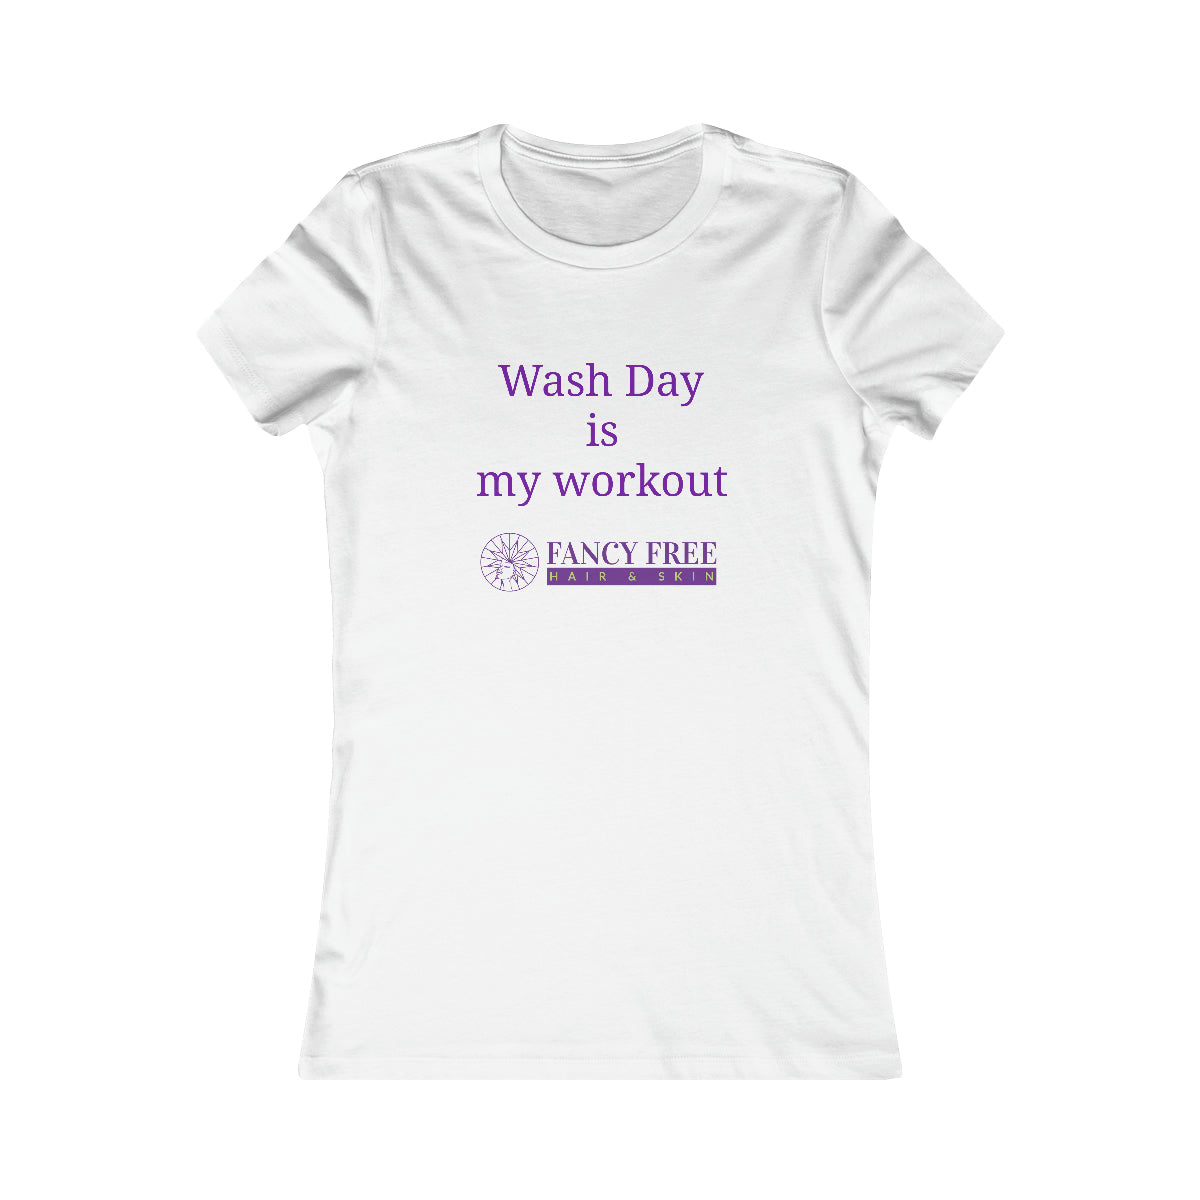 Wash Day Is My Workout Tee